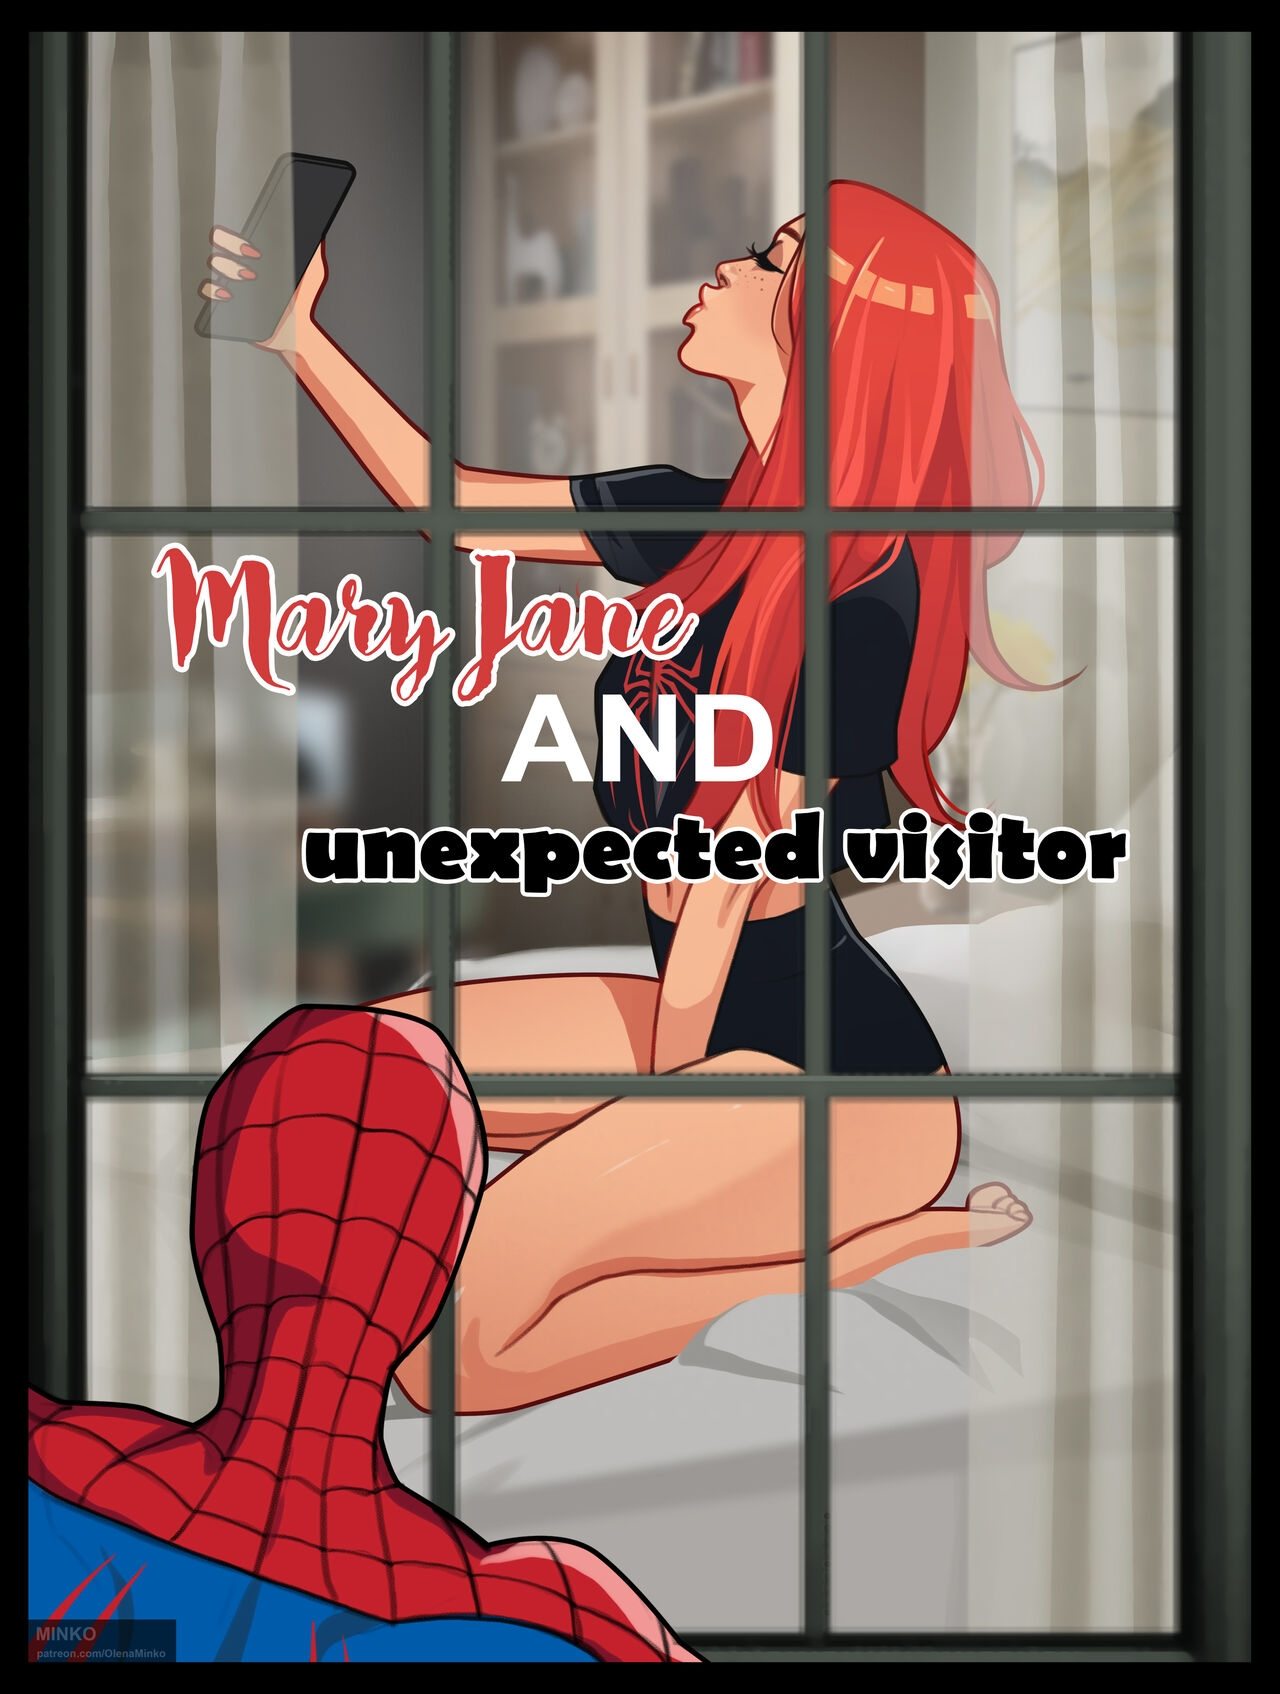 Mary Jane and Unexpected Visitor 1-2 by Olena Minko